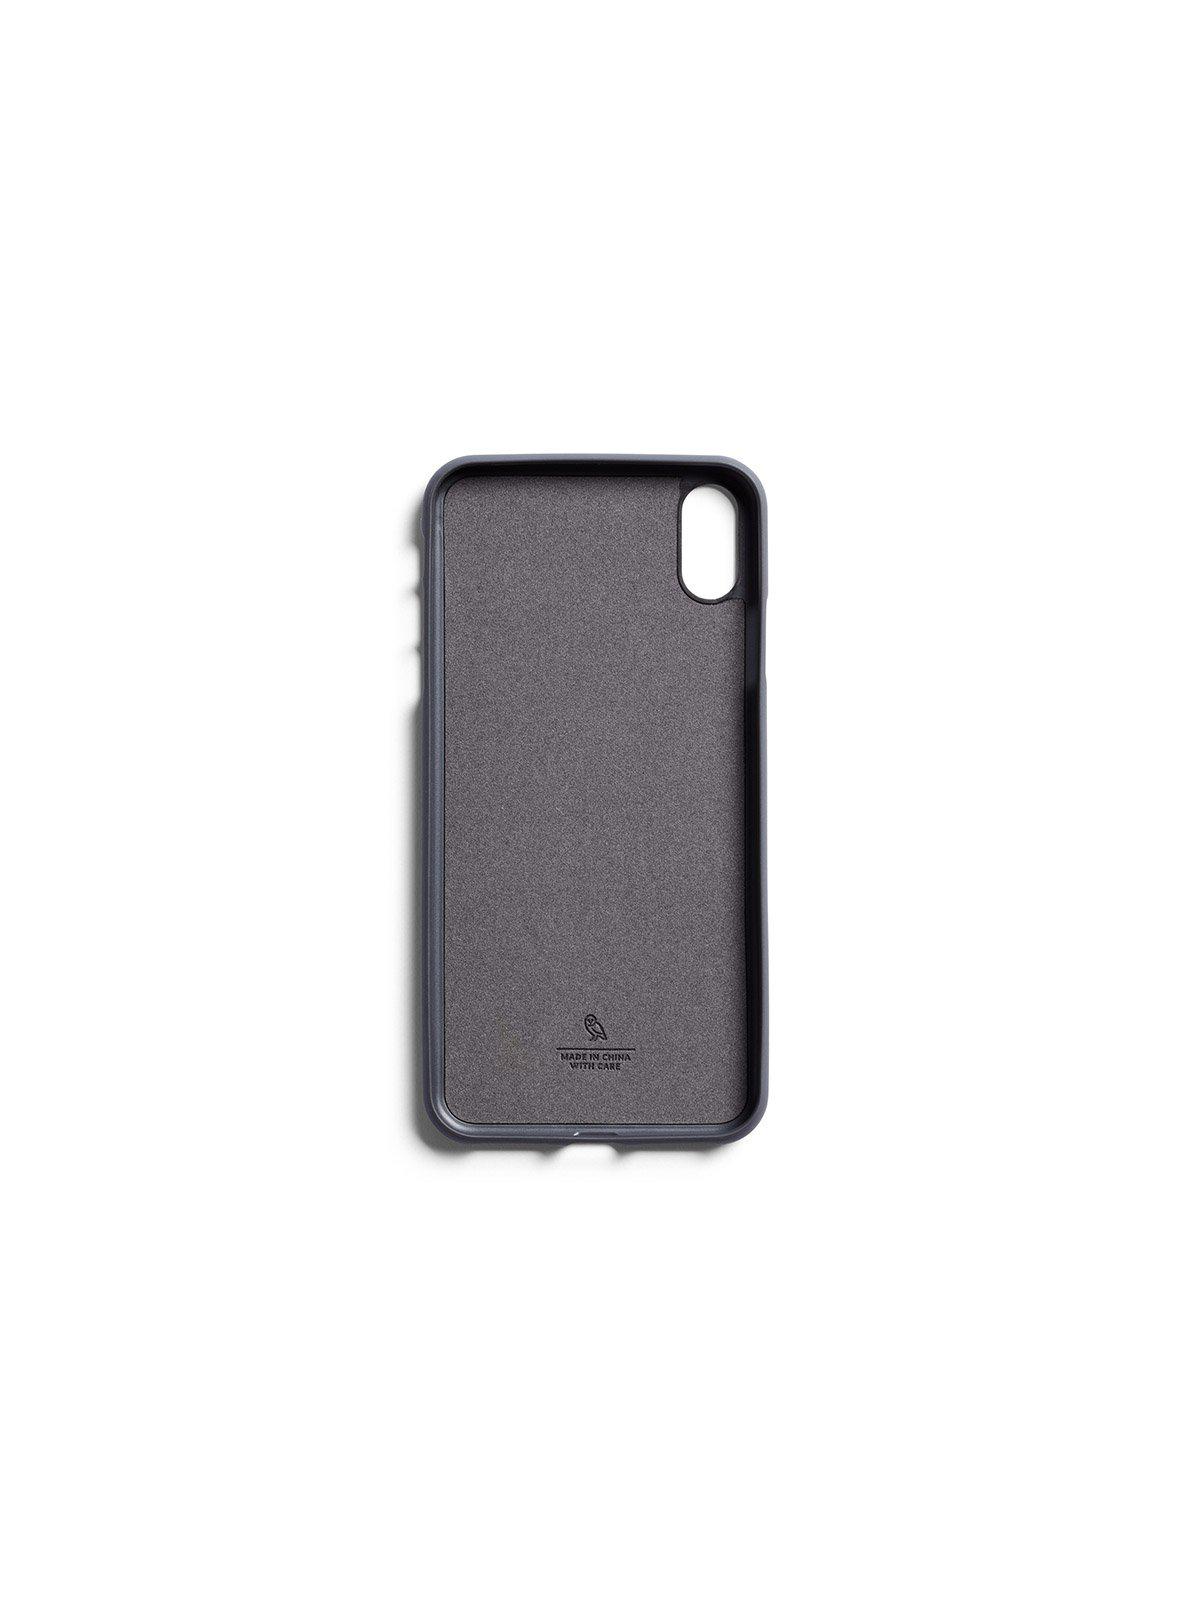 Bellroy Phone Case 0 Card iPhone XS Max Navy - MORE by Morello Indonesia